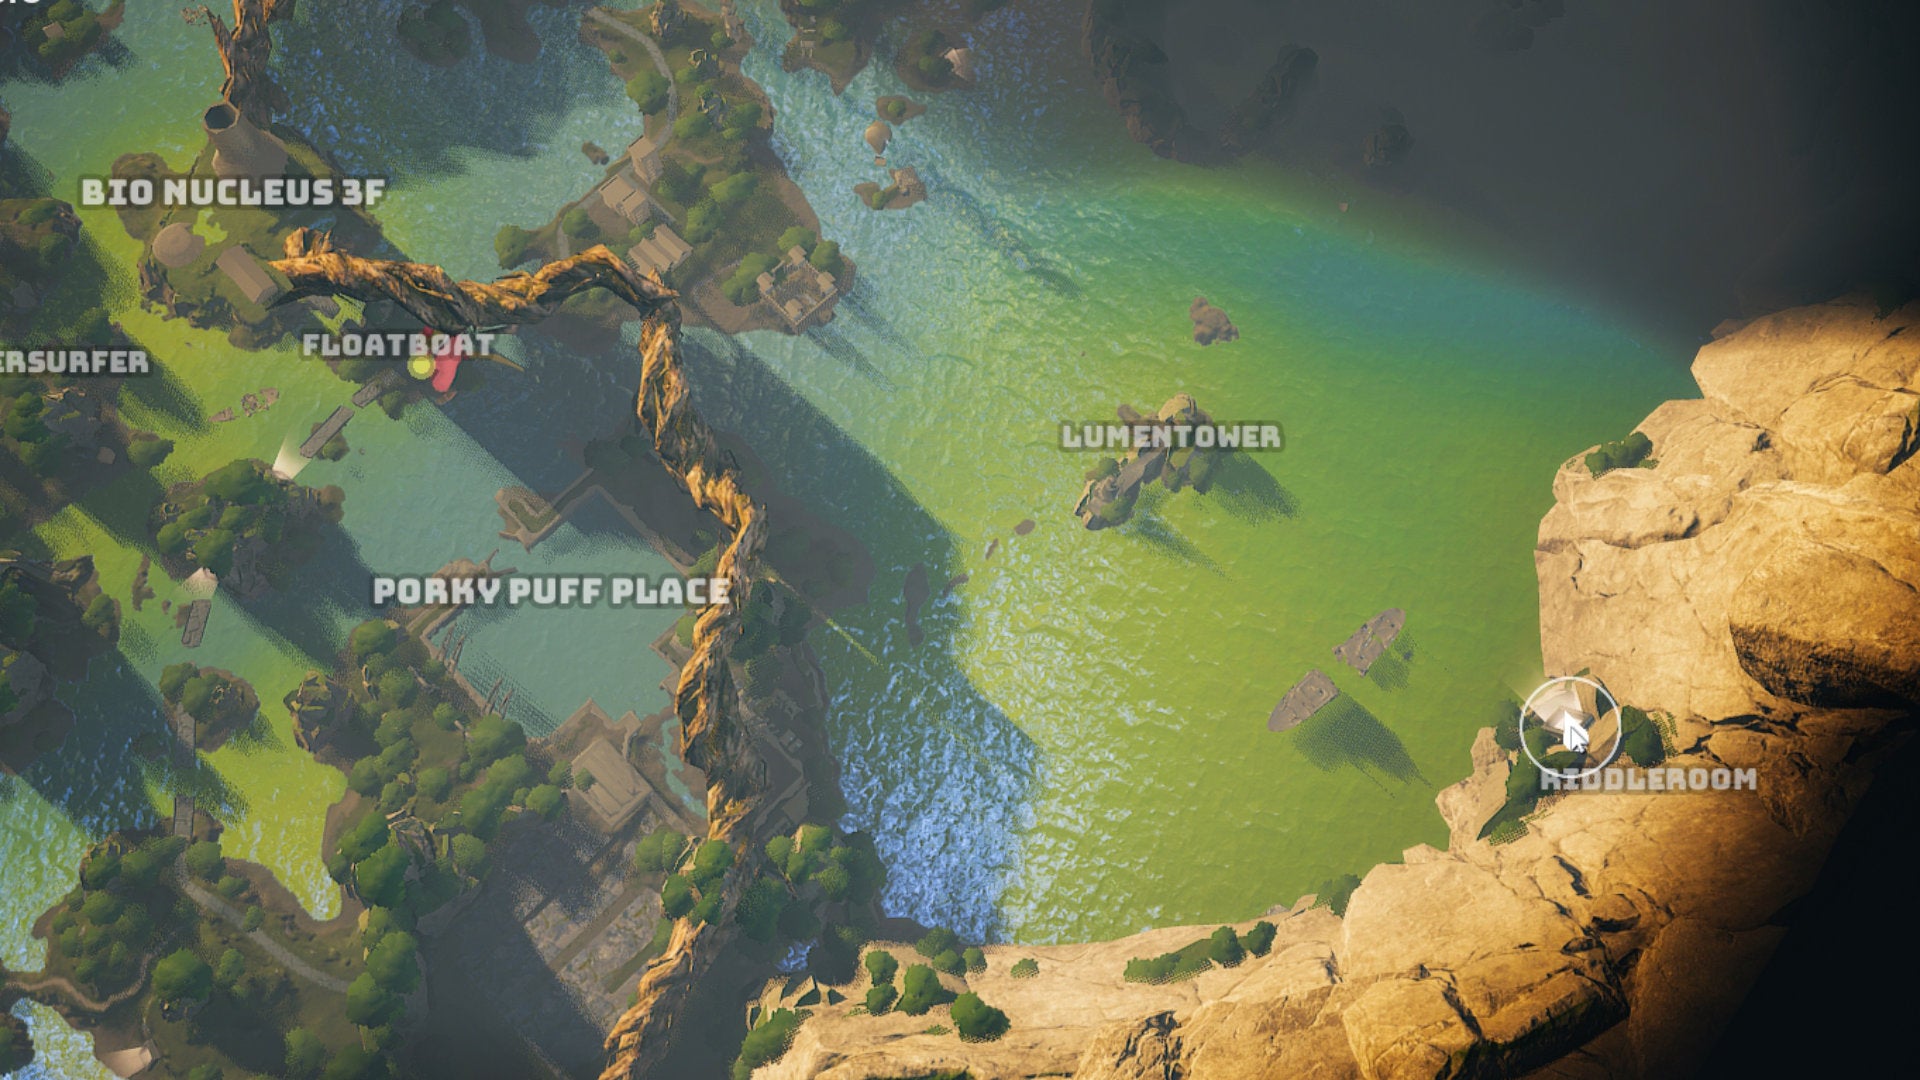 A screenshot of part of the Biomutant map showing the location of the Riddleroom and the Lumentower.